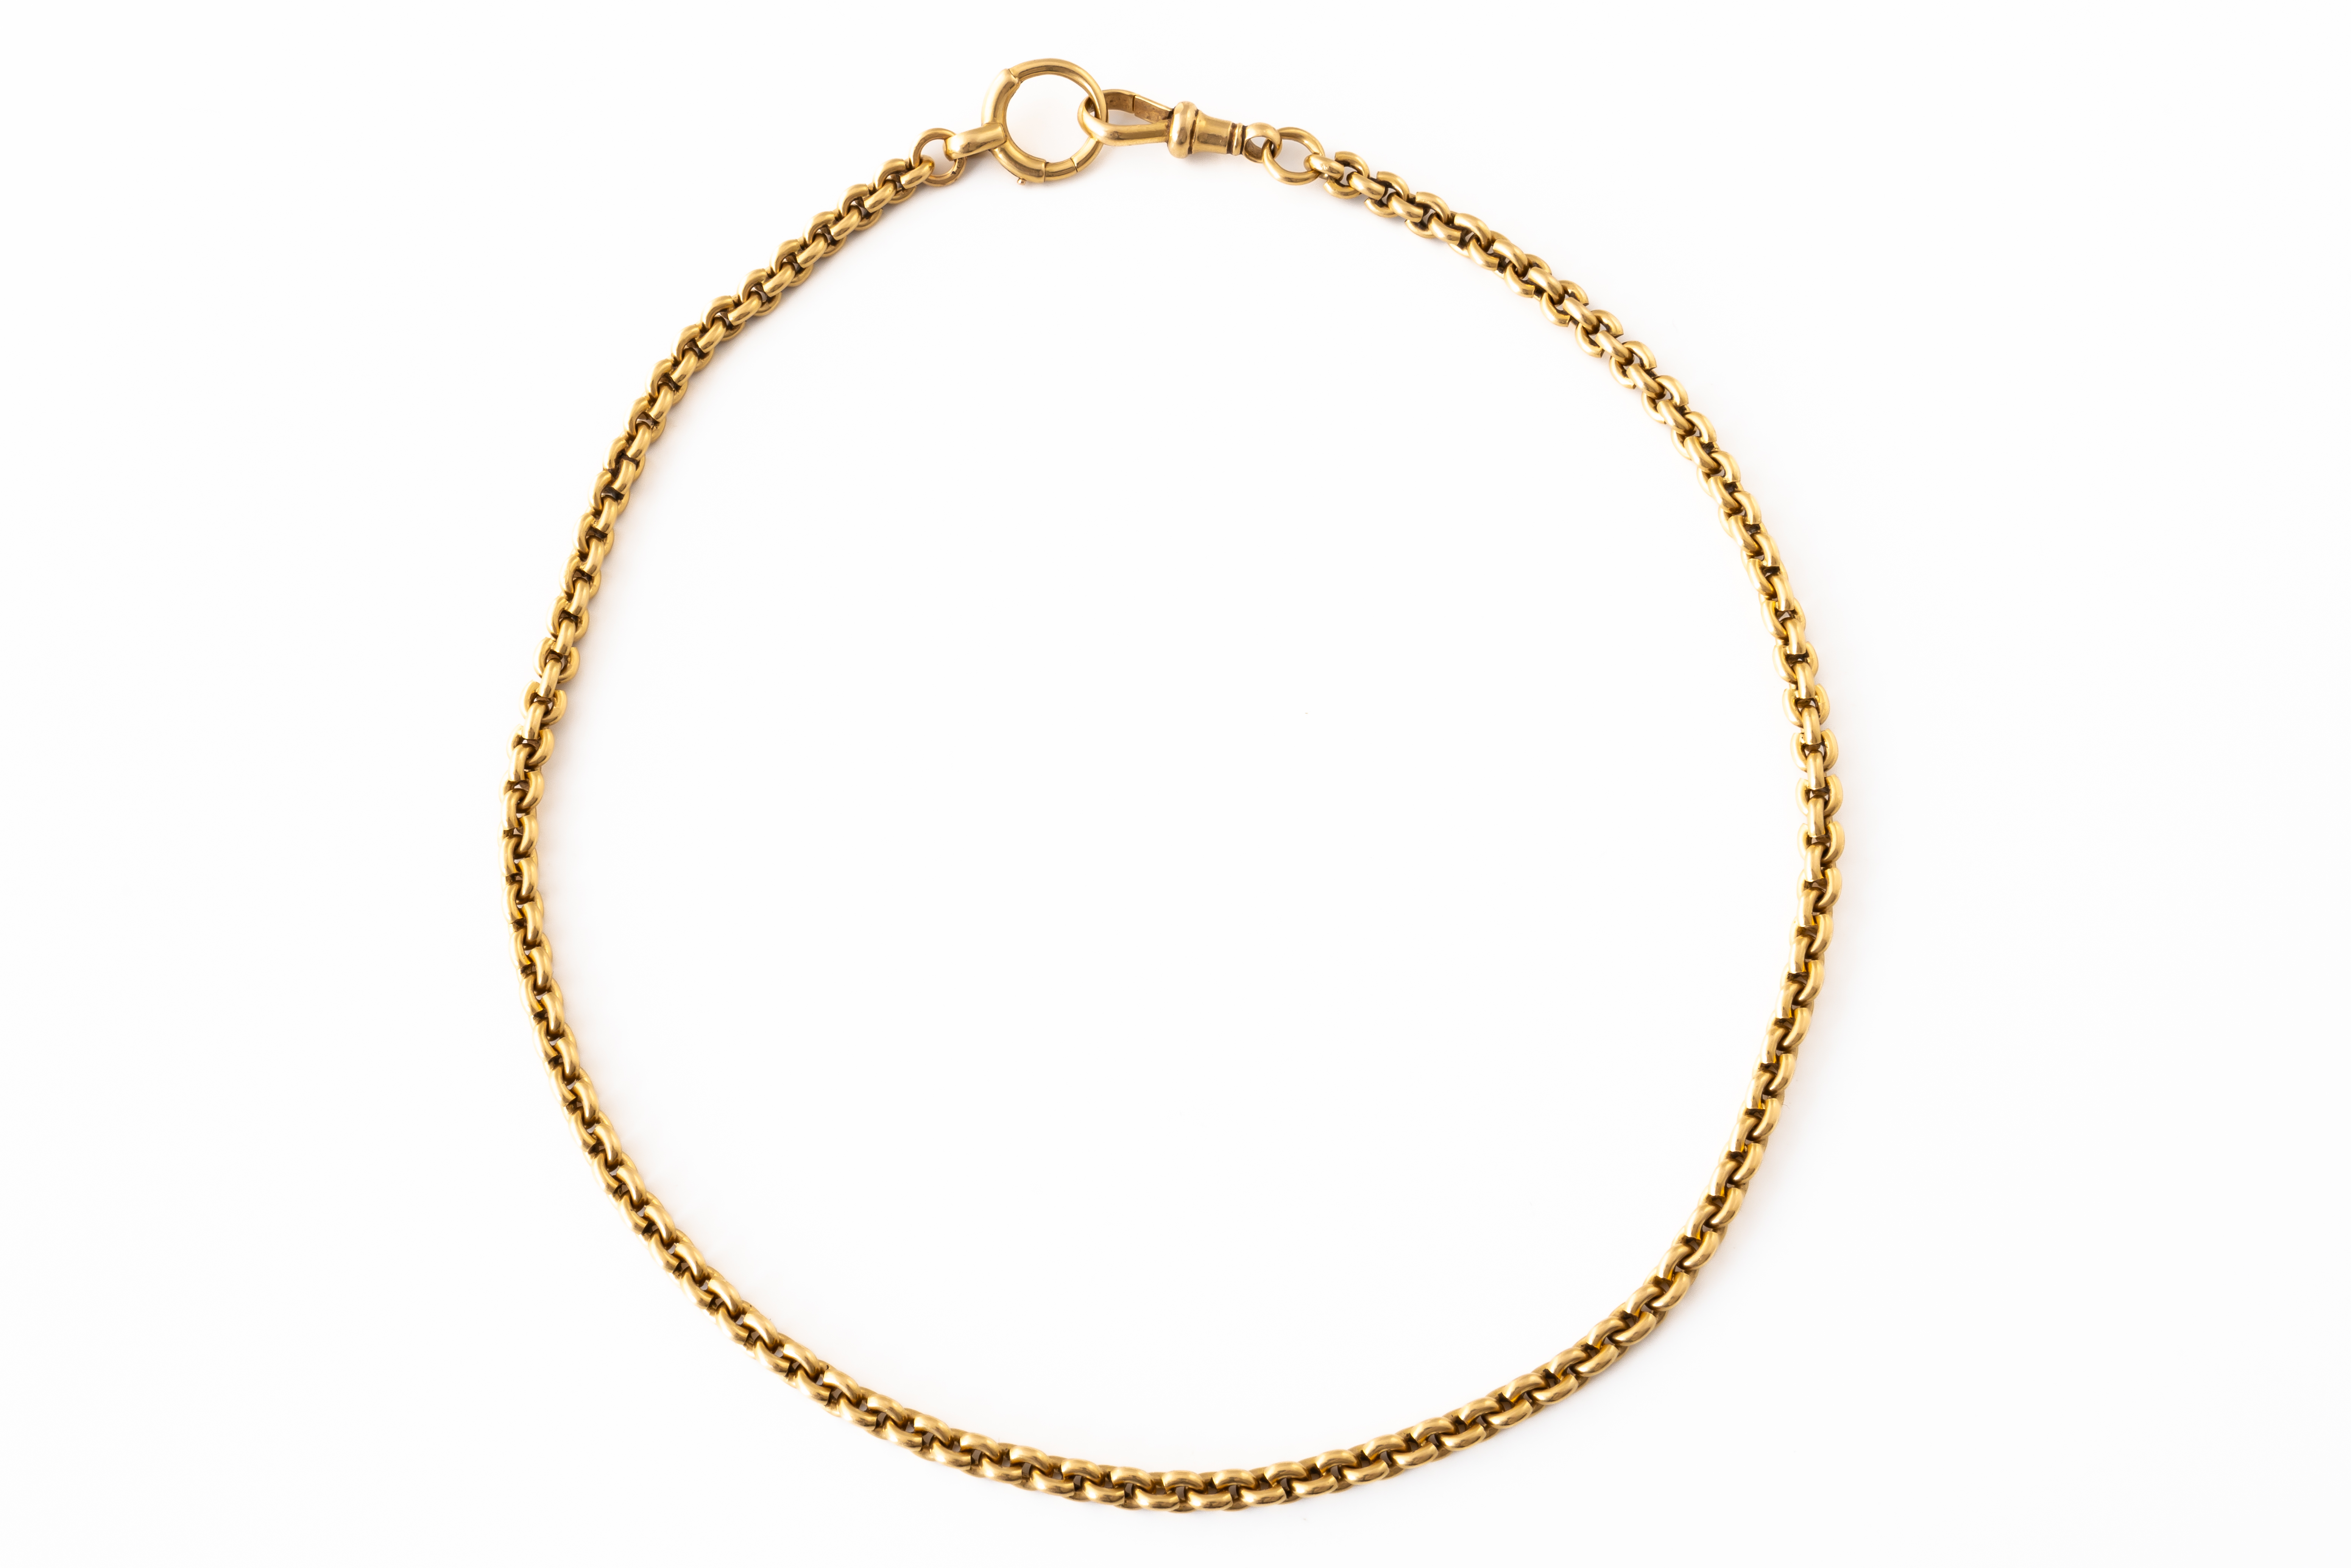 A HEAVY 18CT FANCY LINK GOLD CHAIN - Image 2 of 3